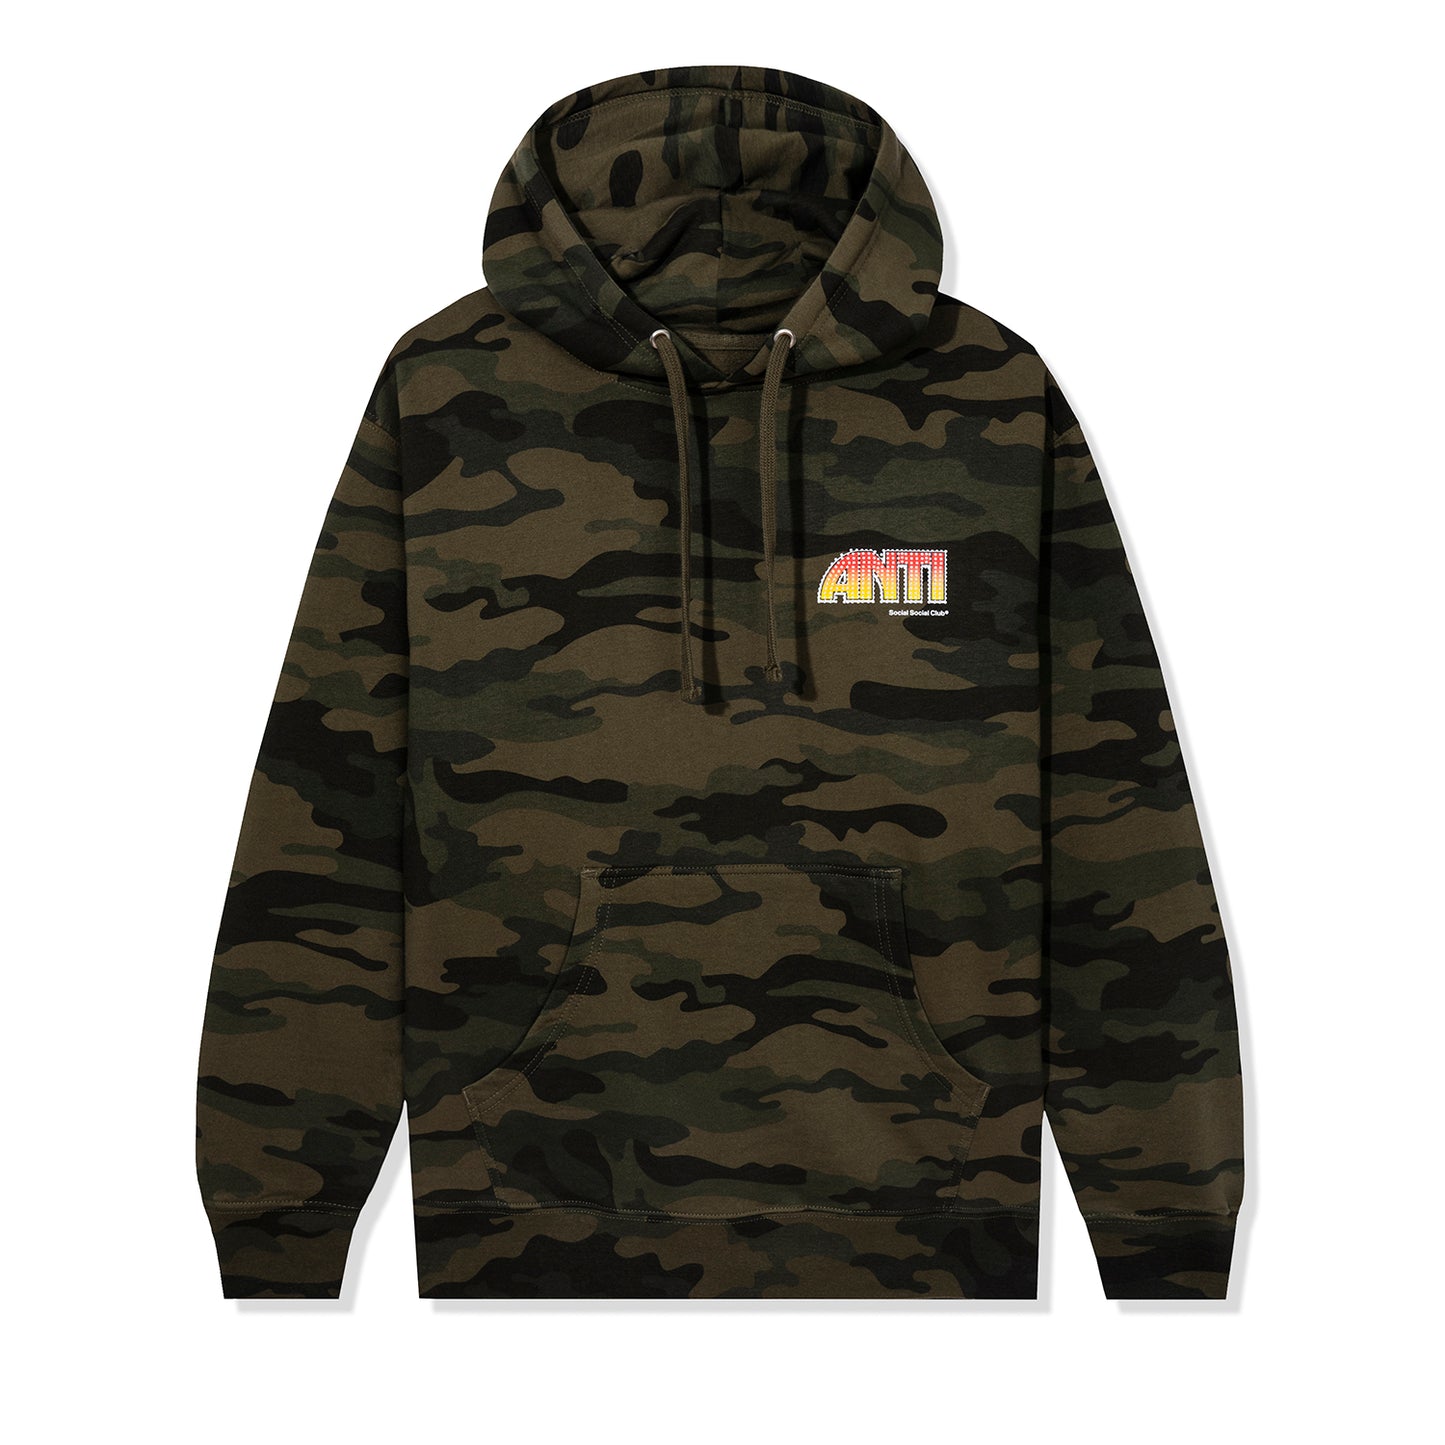 Sunsets and Car Crashes Camo Hoodie